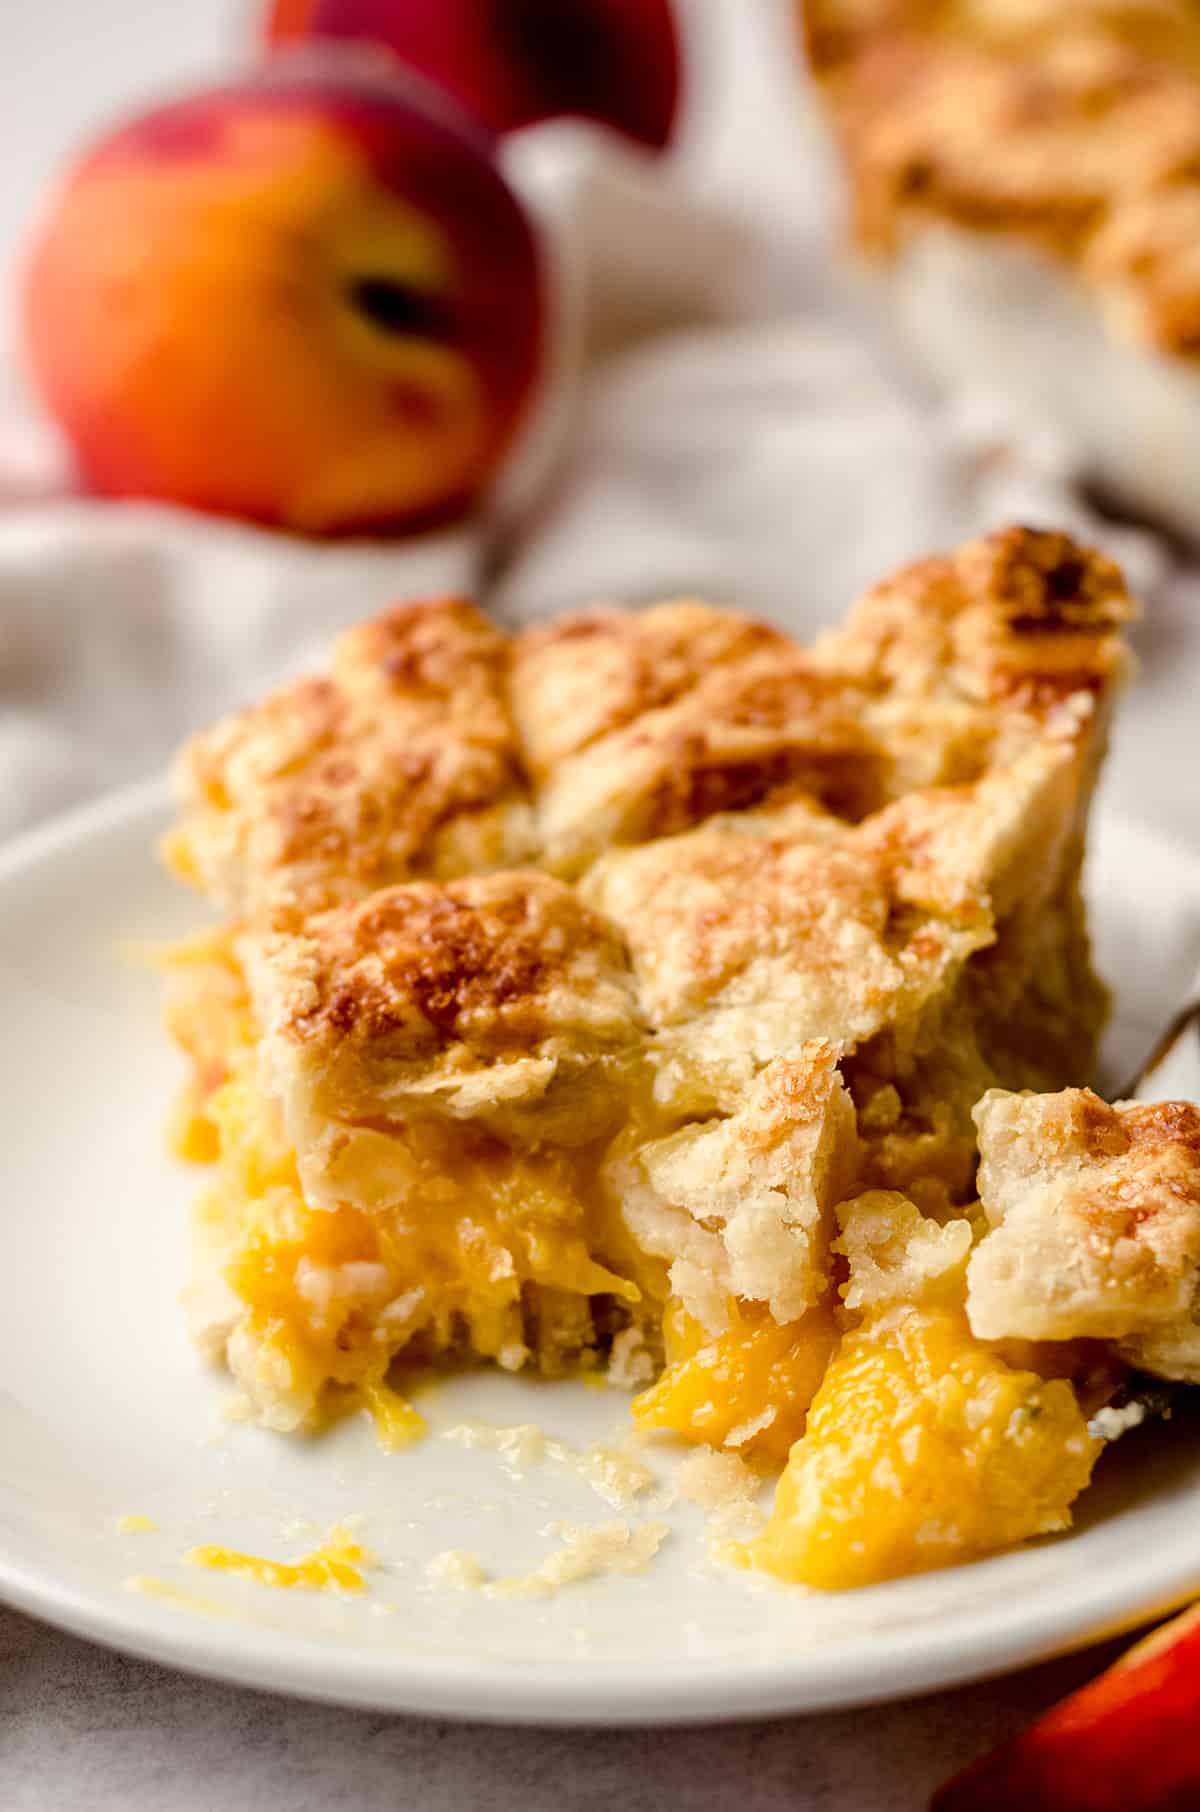 A close up of a slice of peach pie with a portion taken out.